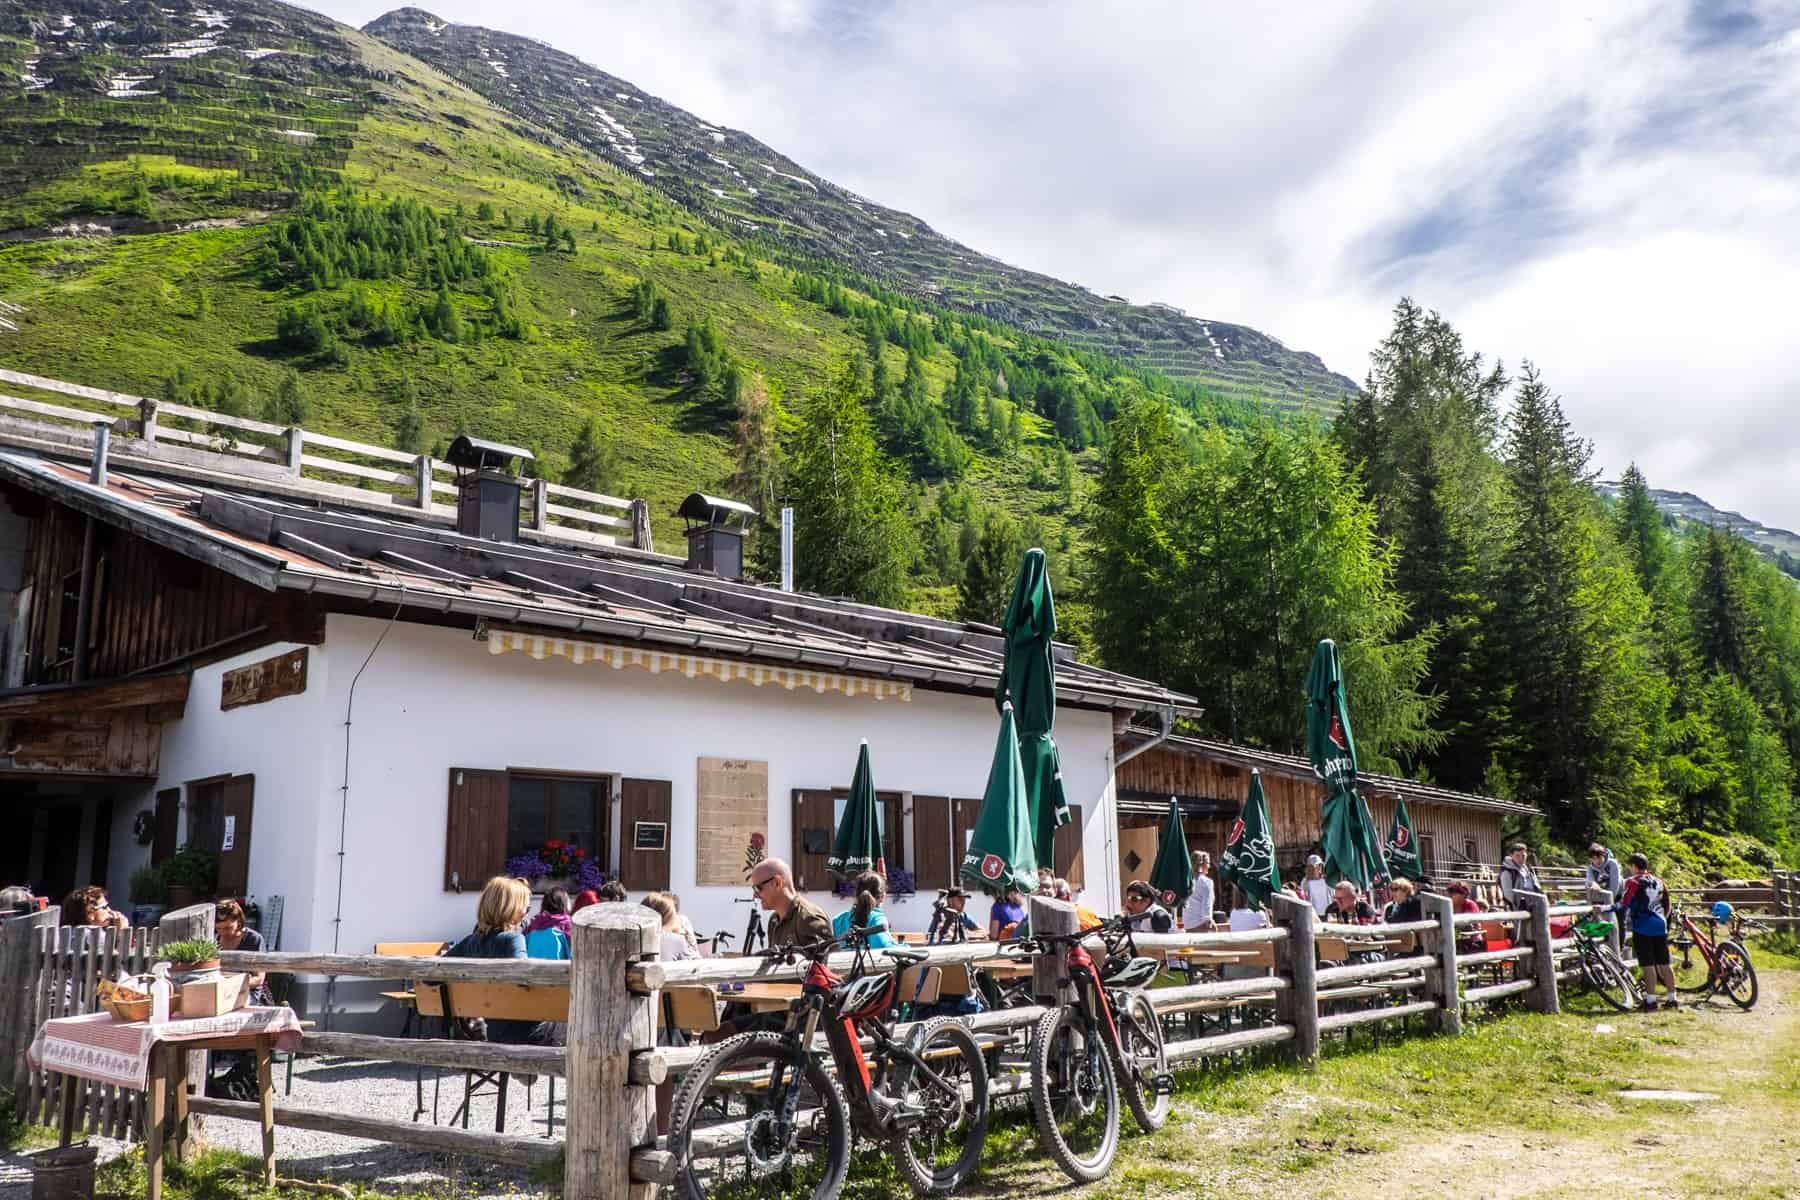 The mountain hut set within green forest called the Rendlalm in St Anton am Arlberg